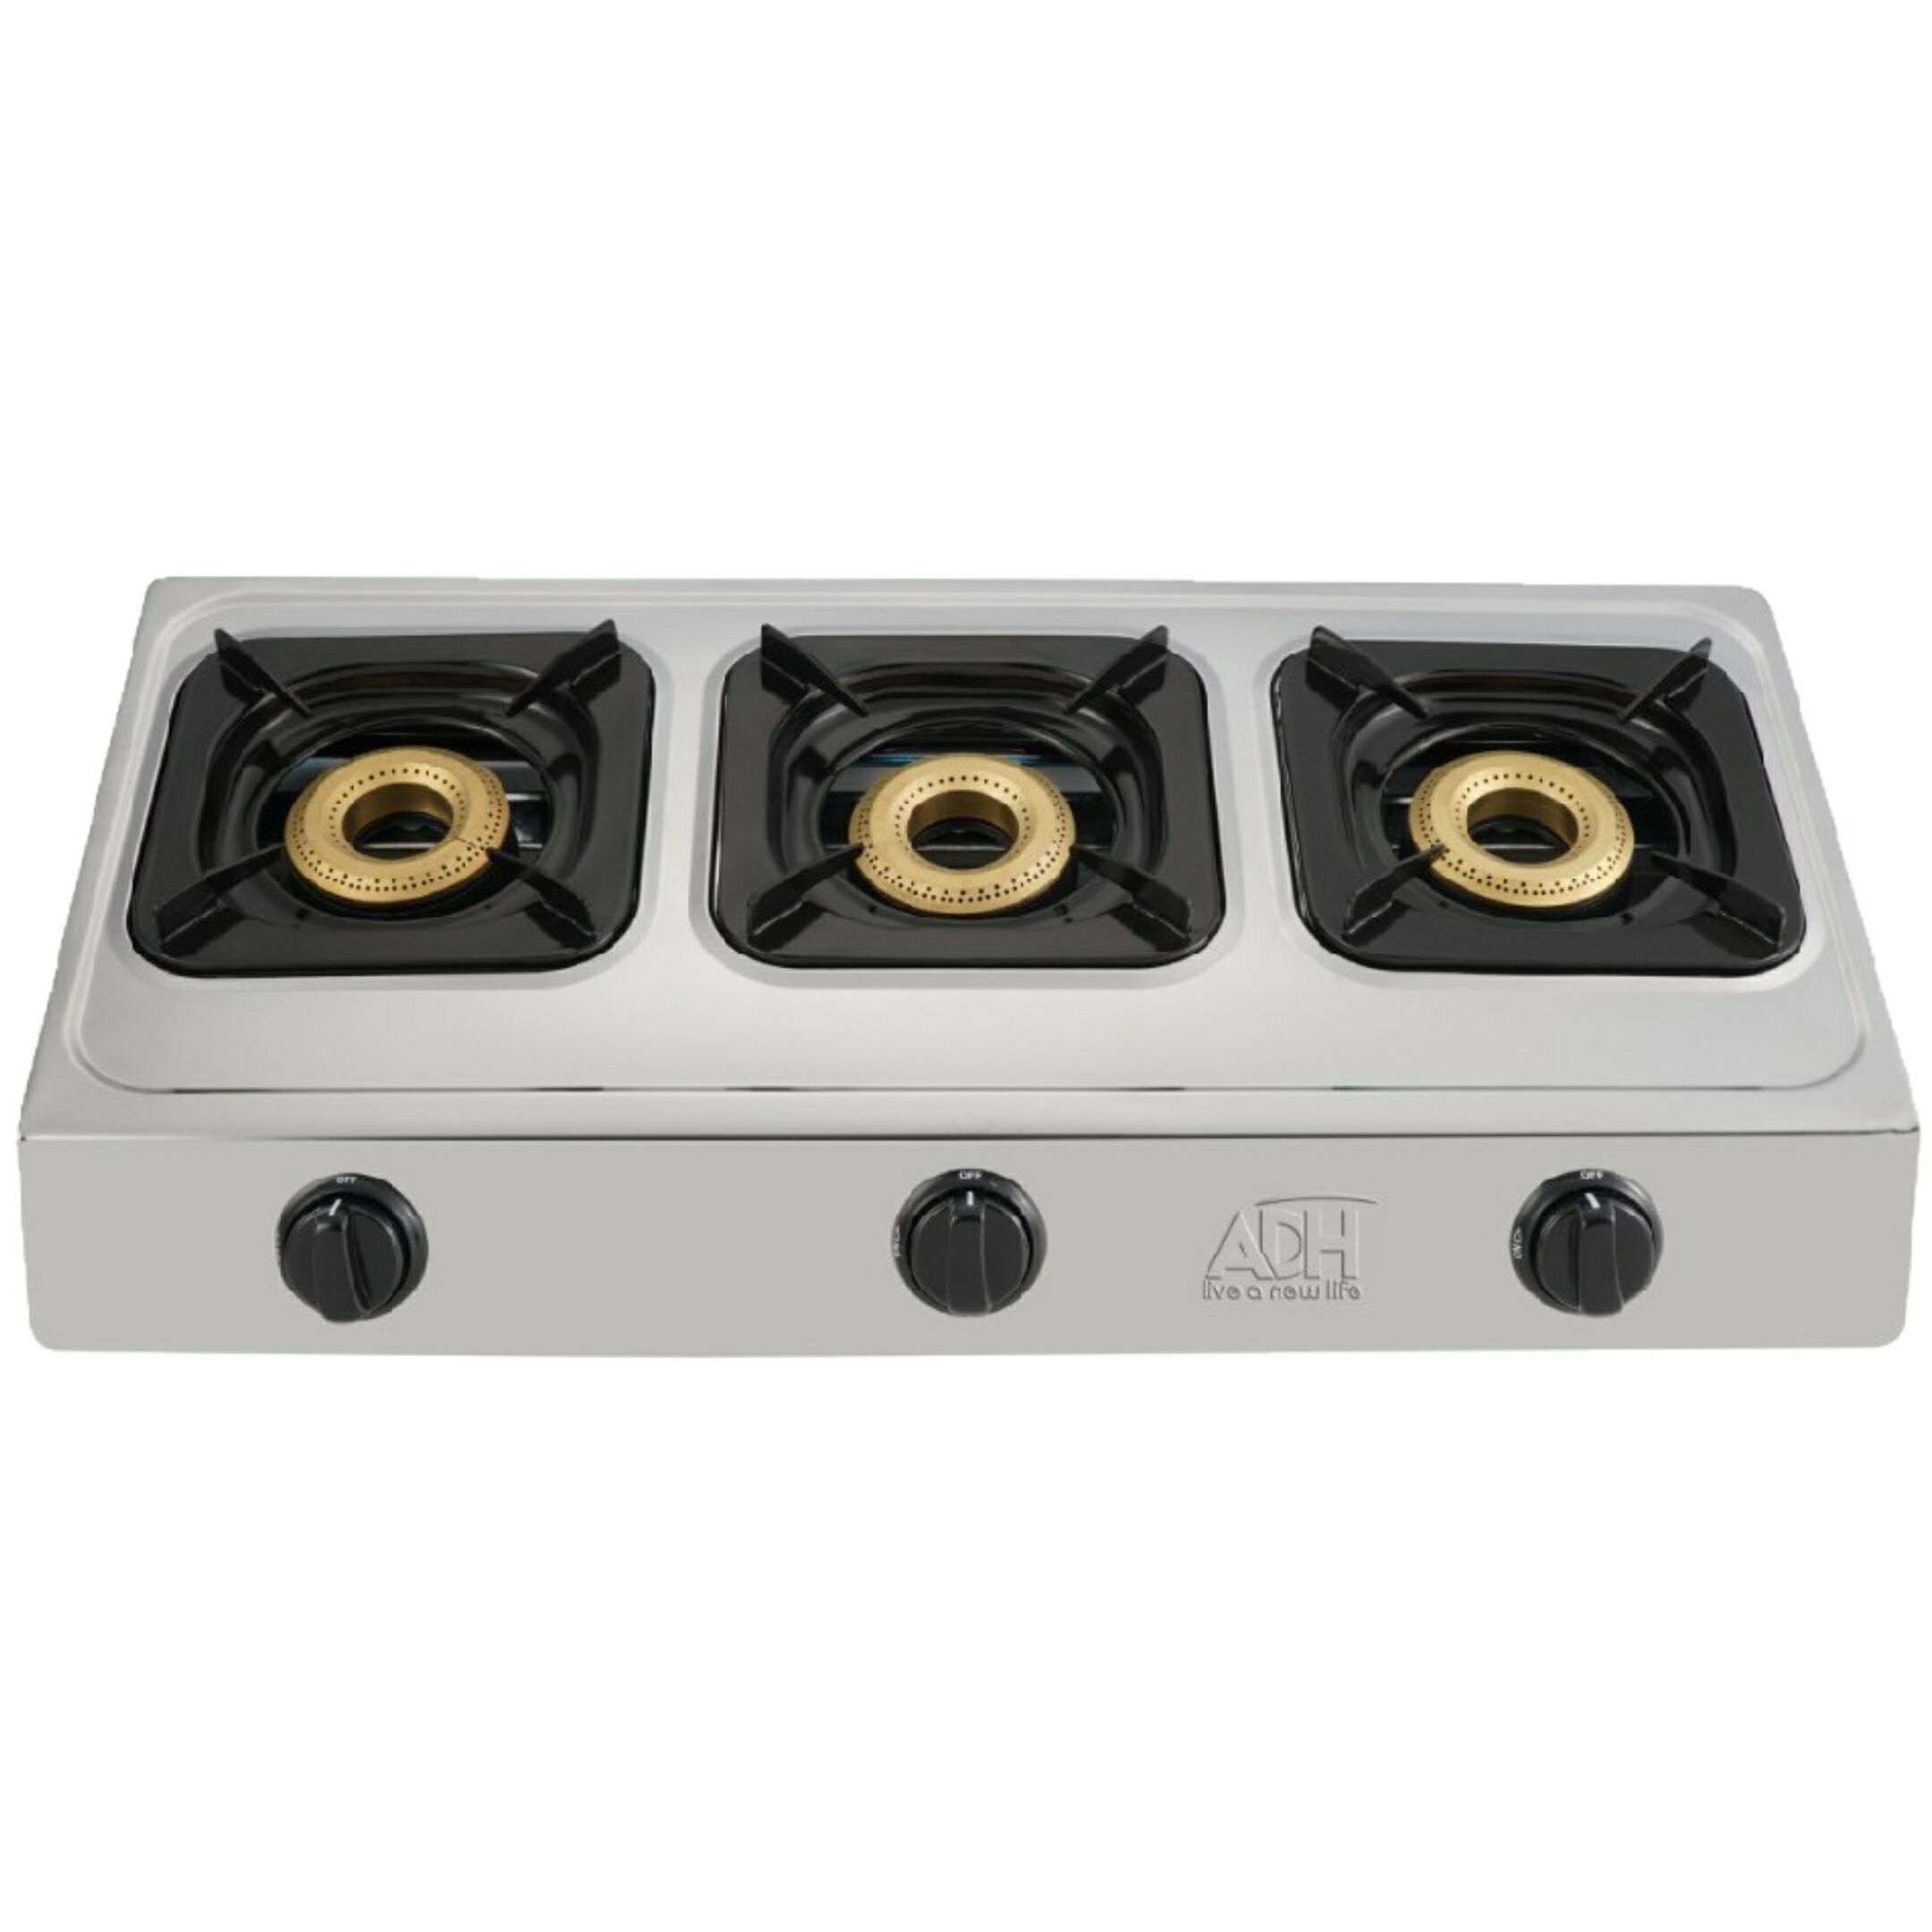 ADH 3 Gas Burner Stainless Steel Table Top